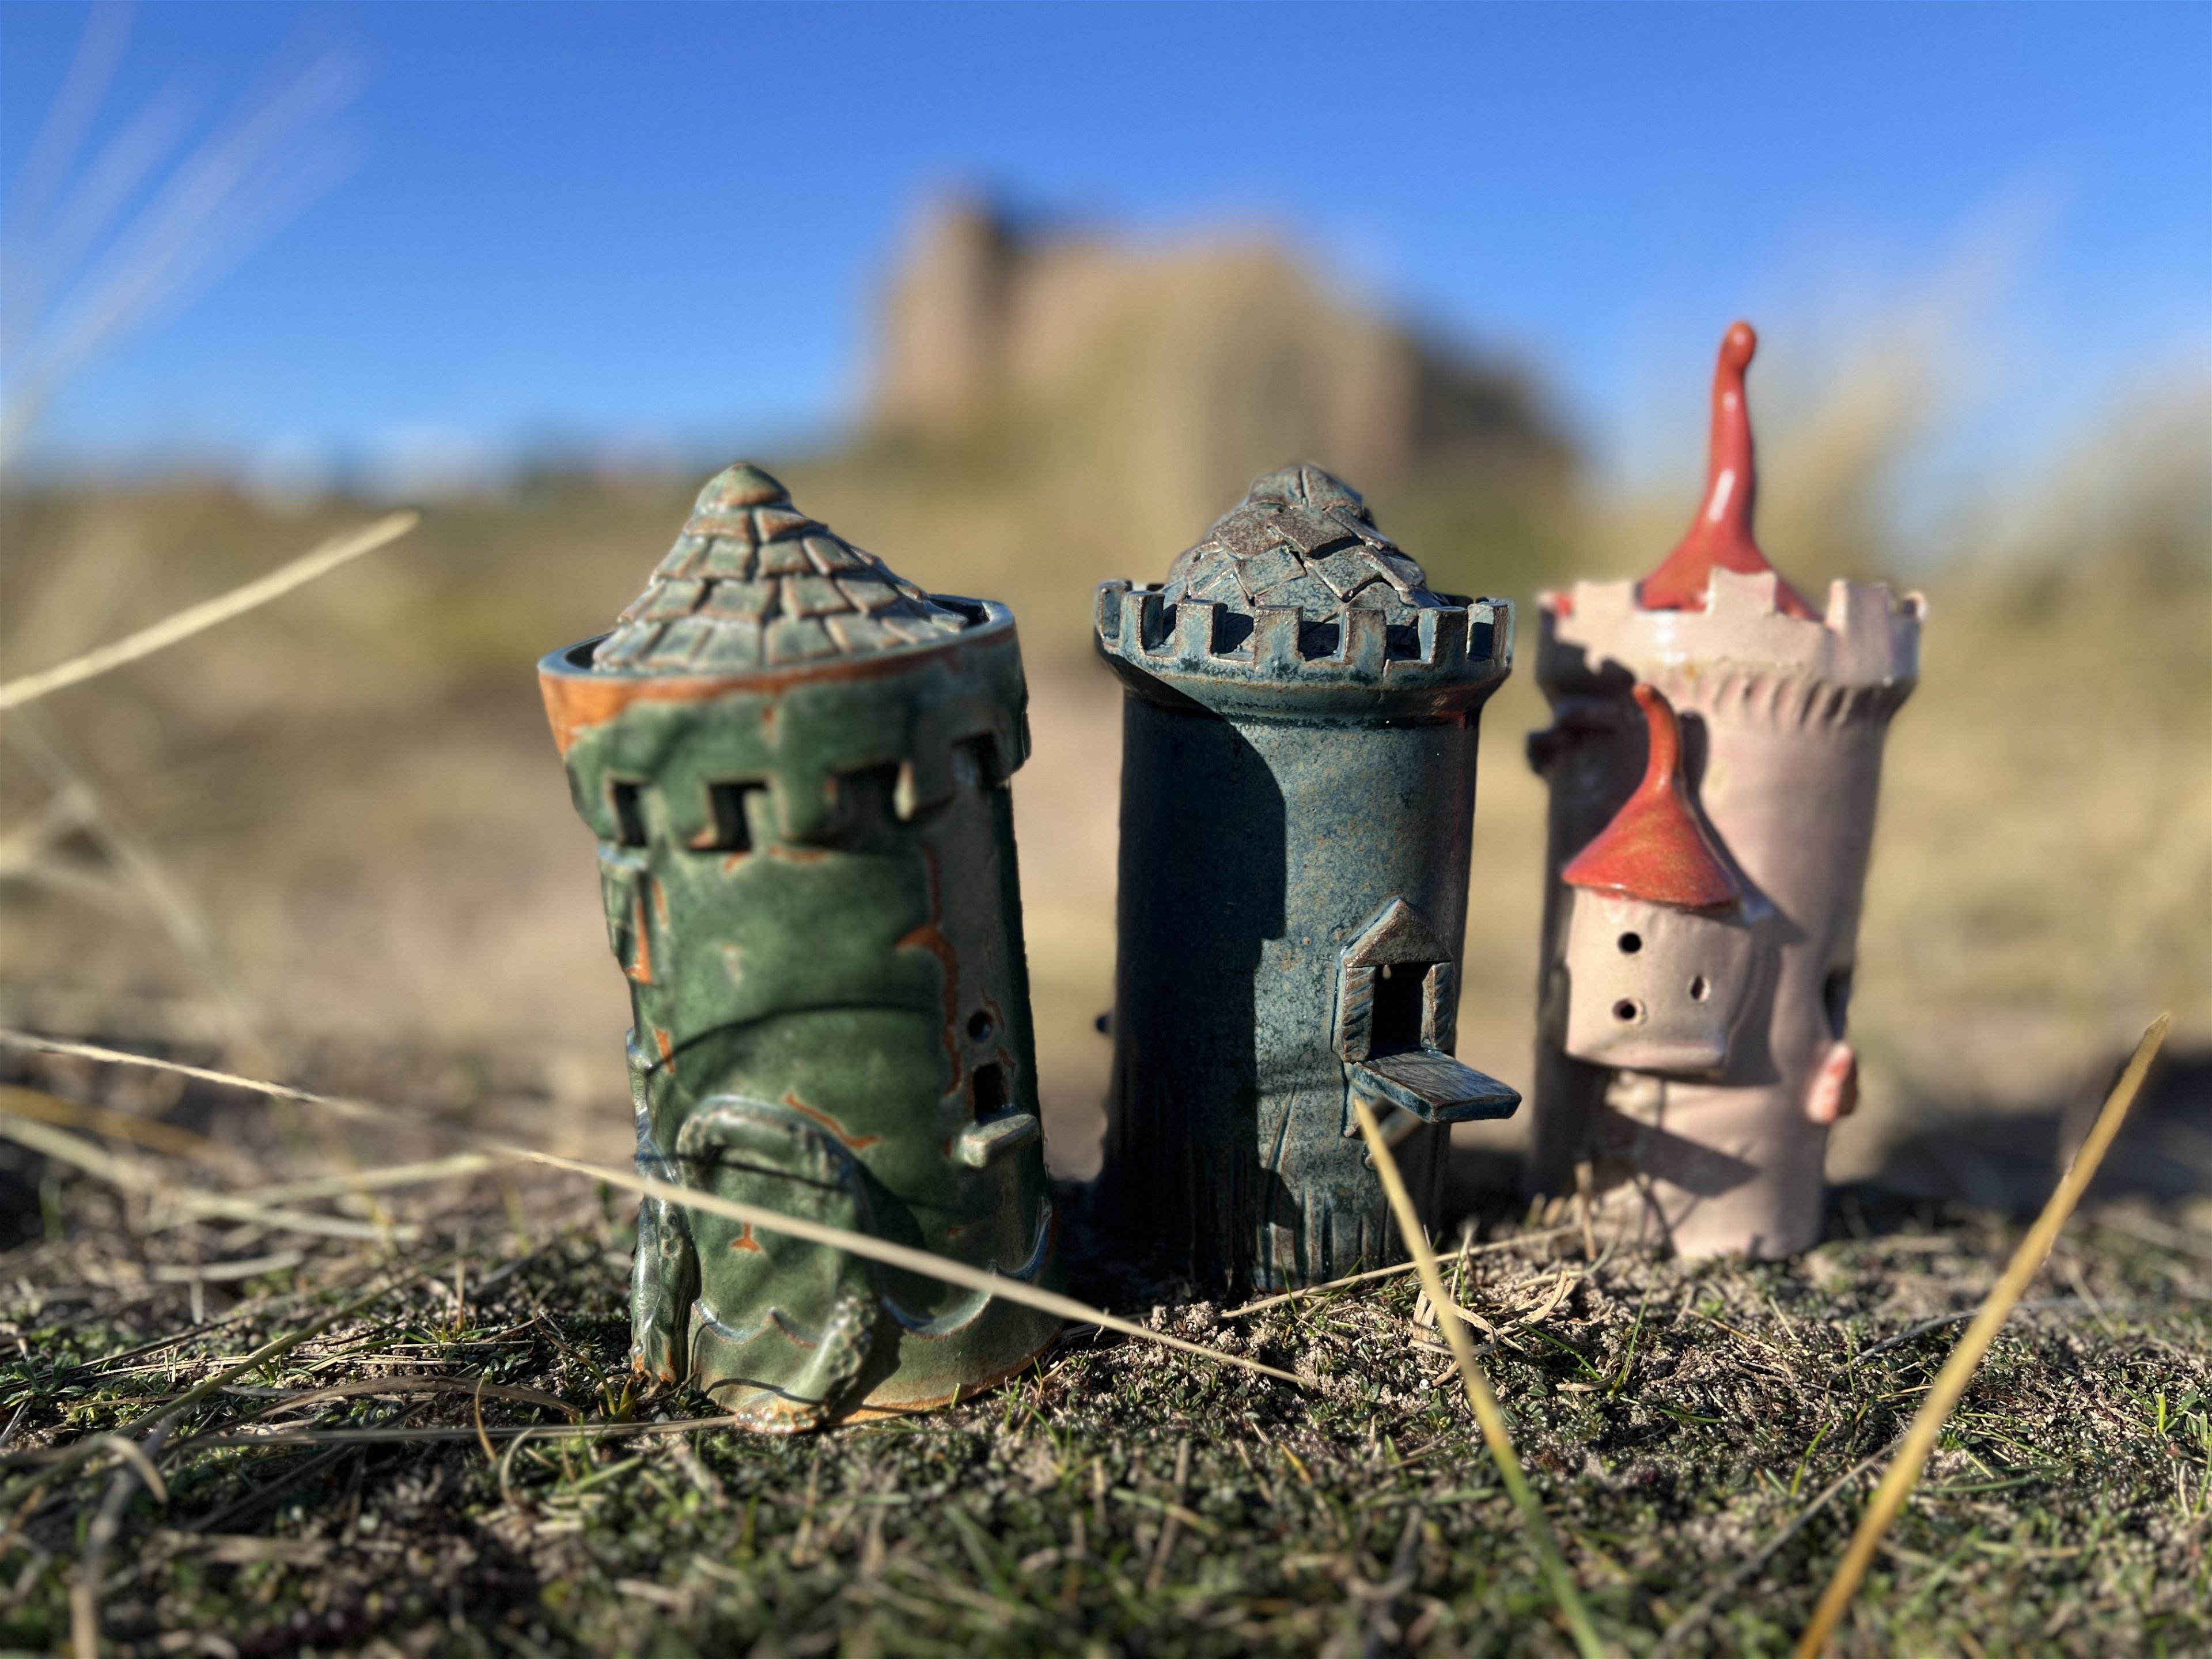 Castle Building at Ravn Clay